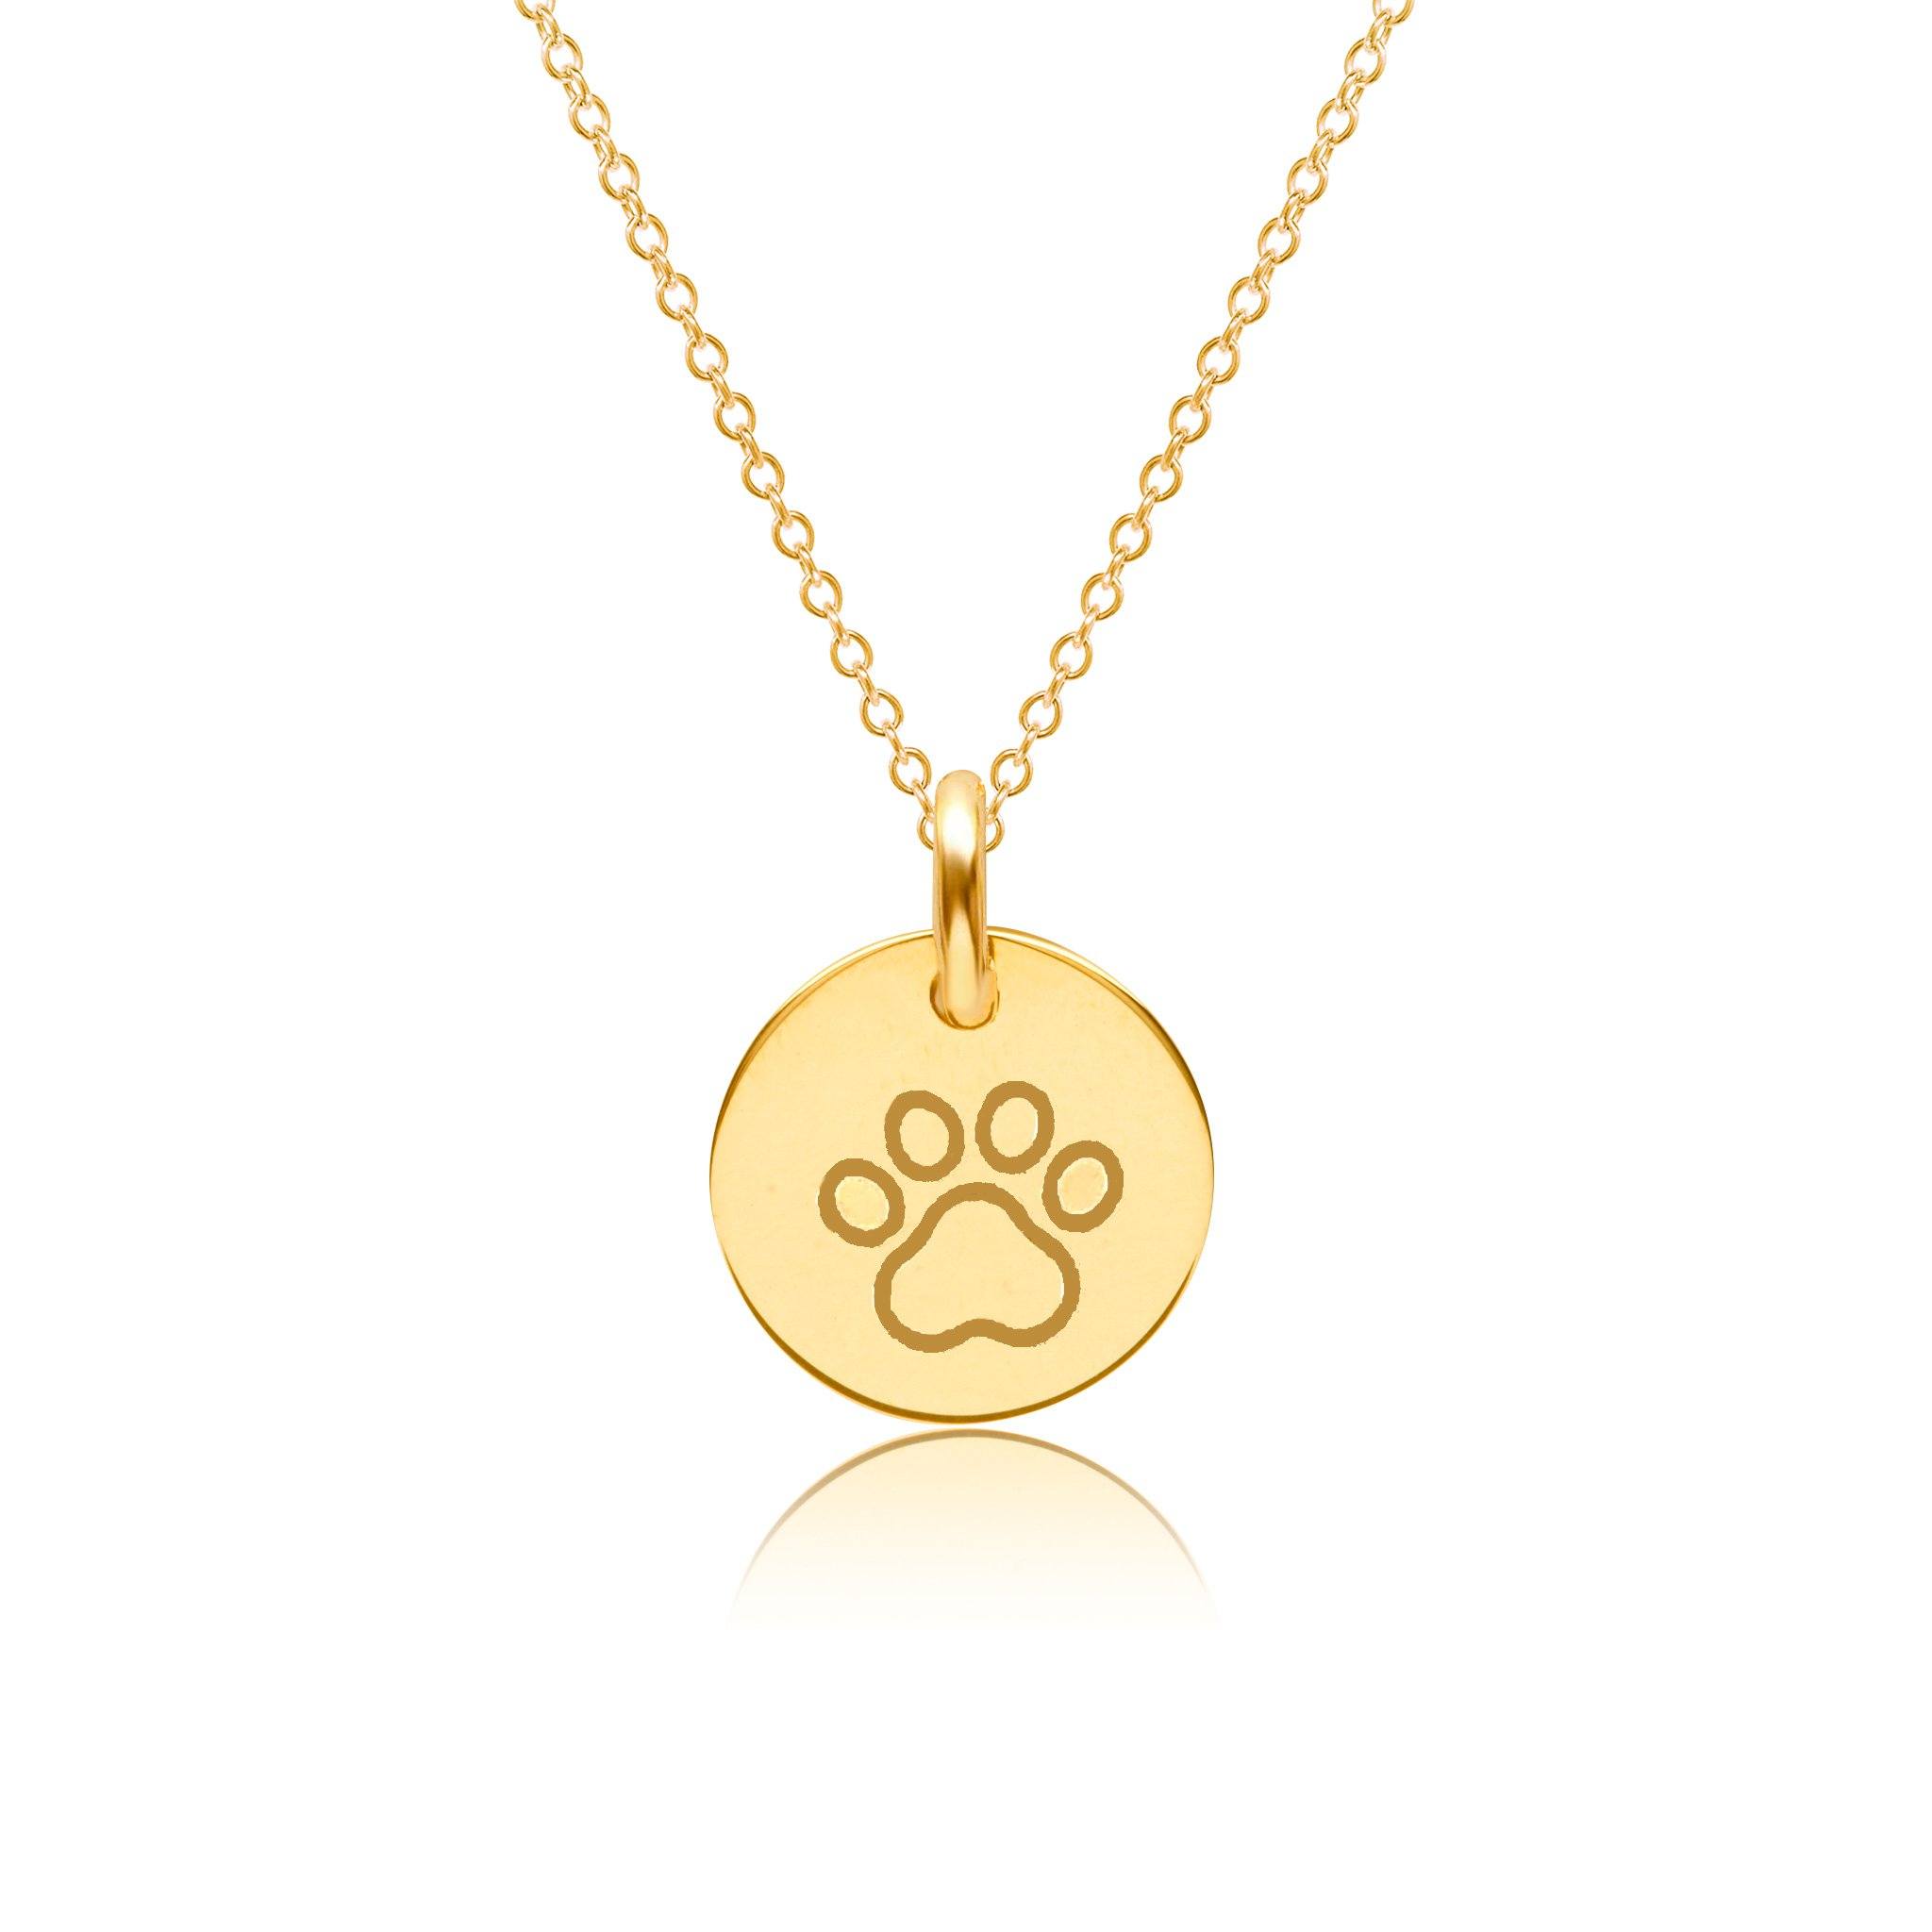 Gold Charm - Flat Paw Print with 24K Gold Plate